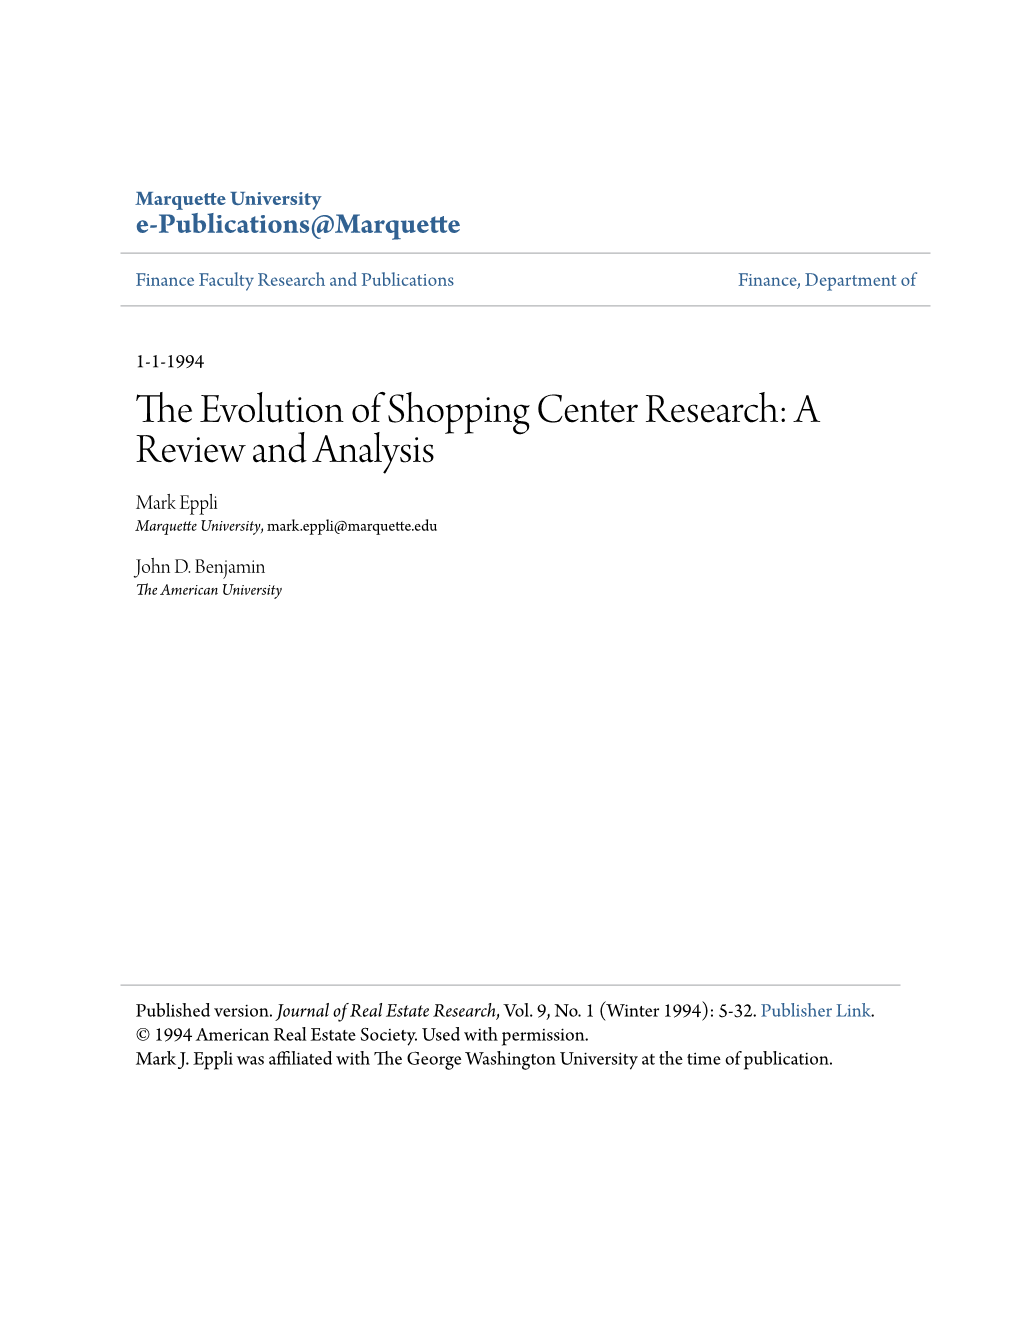 The Evolution of Shopping Center Research: a Review and Analysis